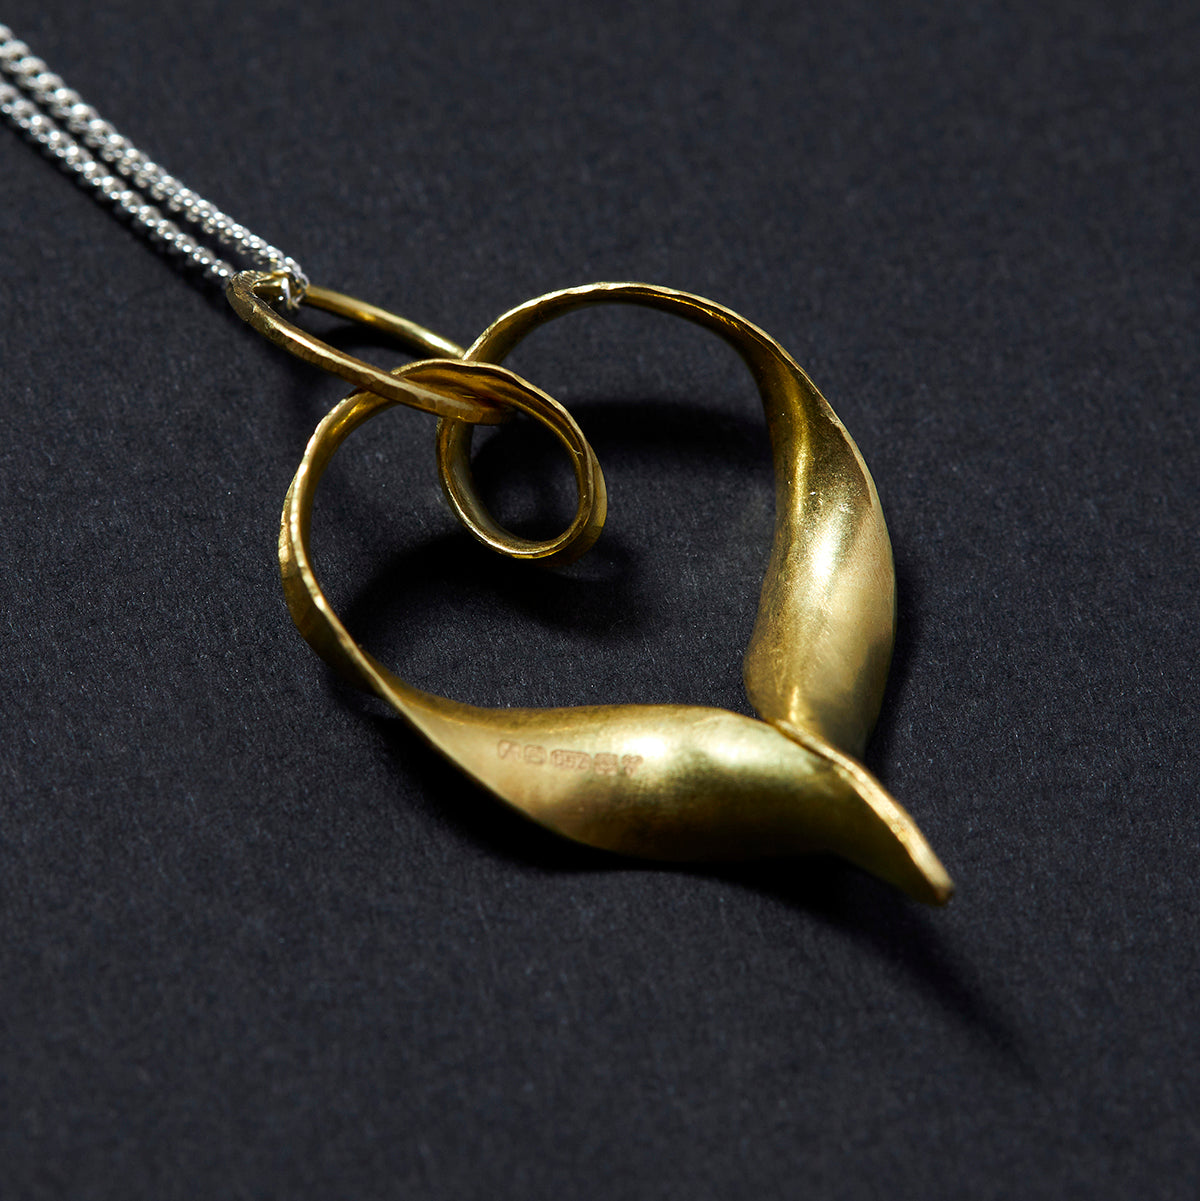 A recycled 18 carat gold heart pendant made from a ribbon of metal, hammered into a continuous heart shape, with a loop at the top for the chain to pass through and elegant twisted ends which join in a point at the bottom. This is a back view, showing the hallmark.